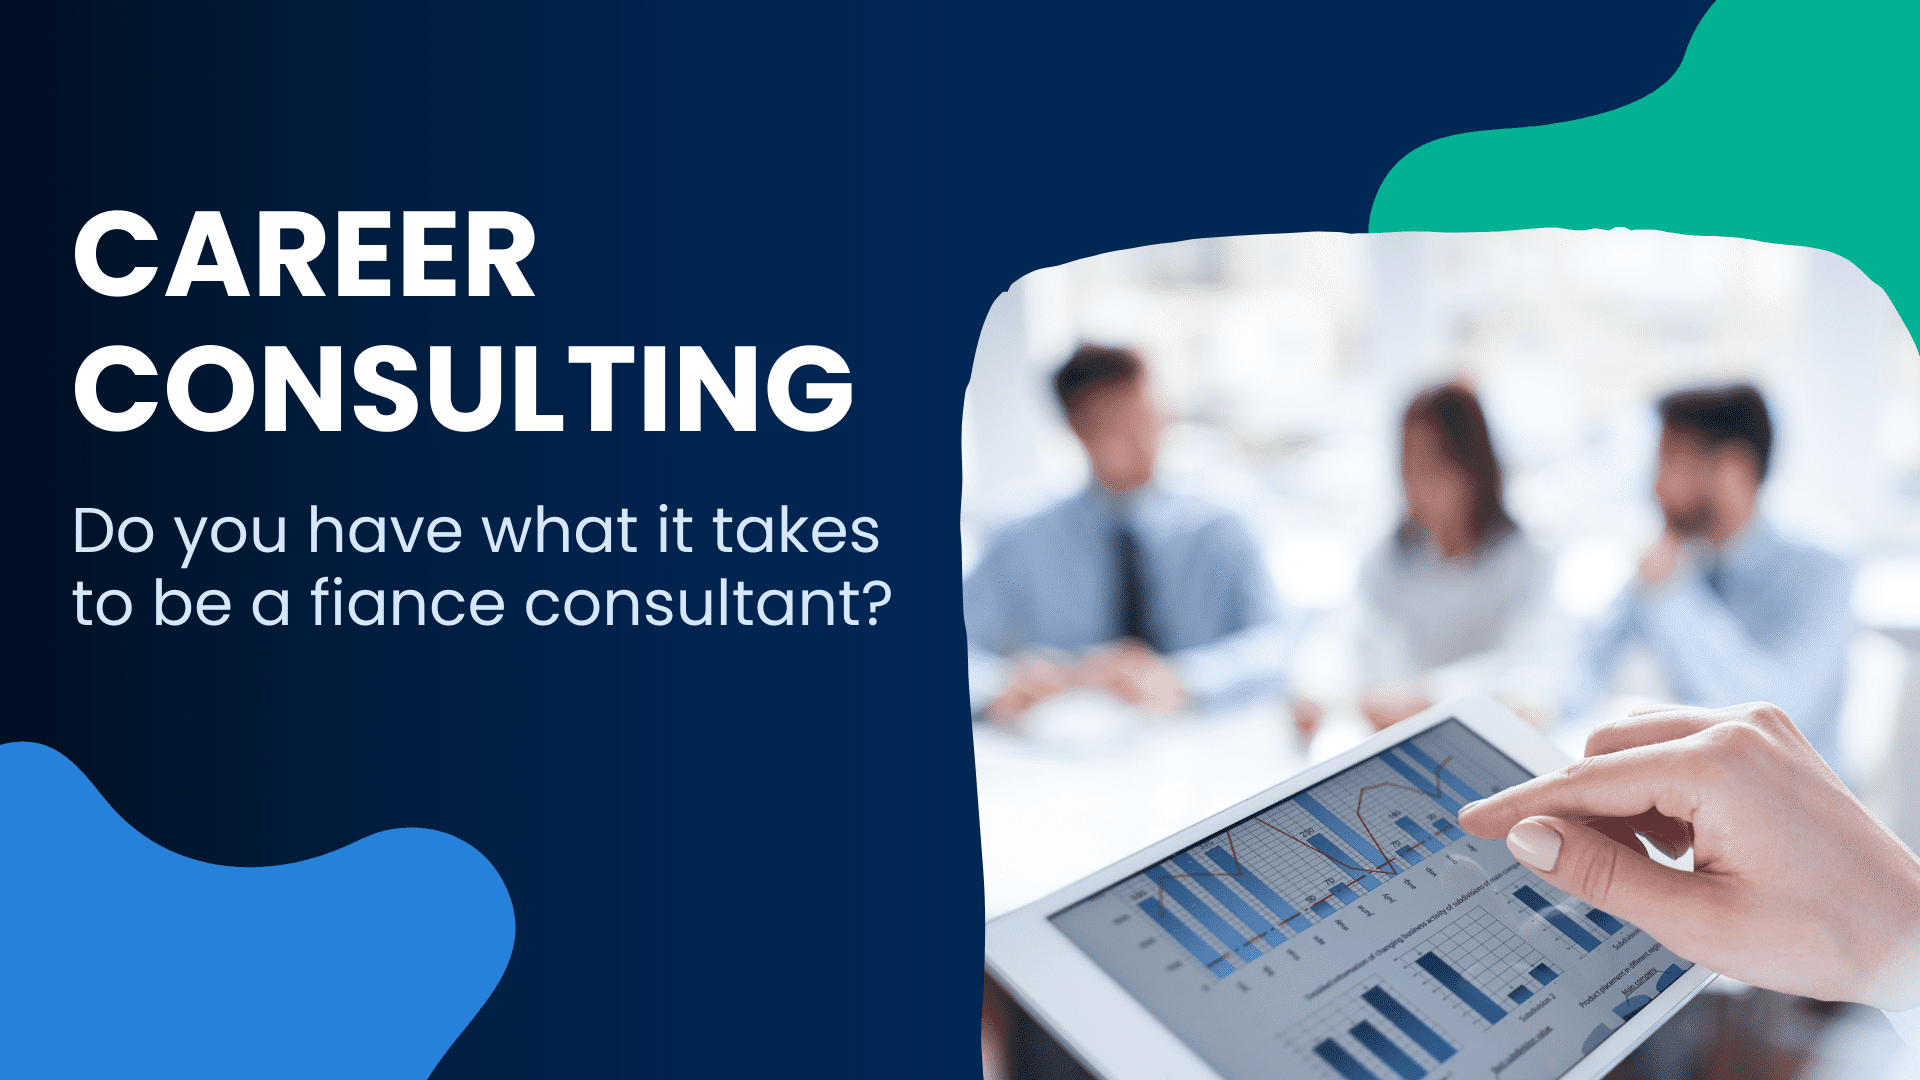 Finance consulting - Do you have what it takes?